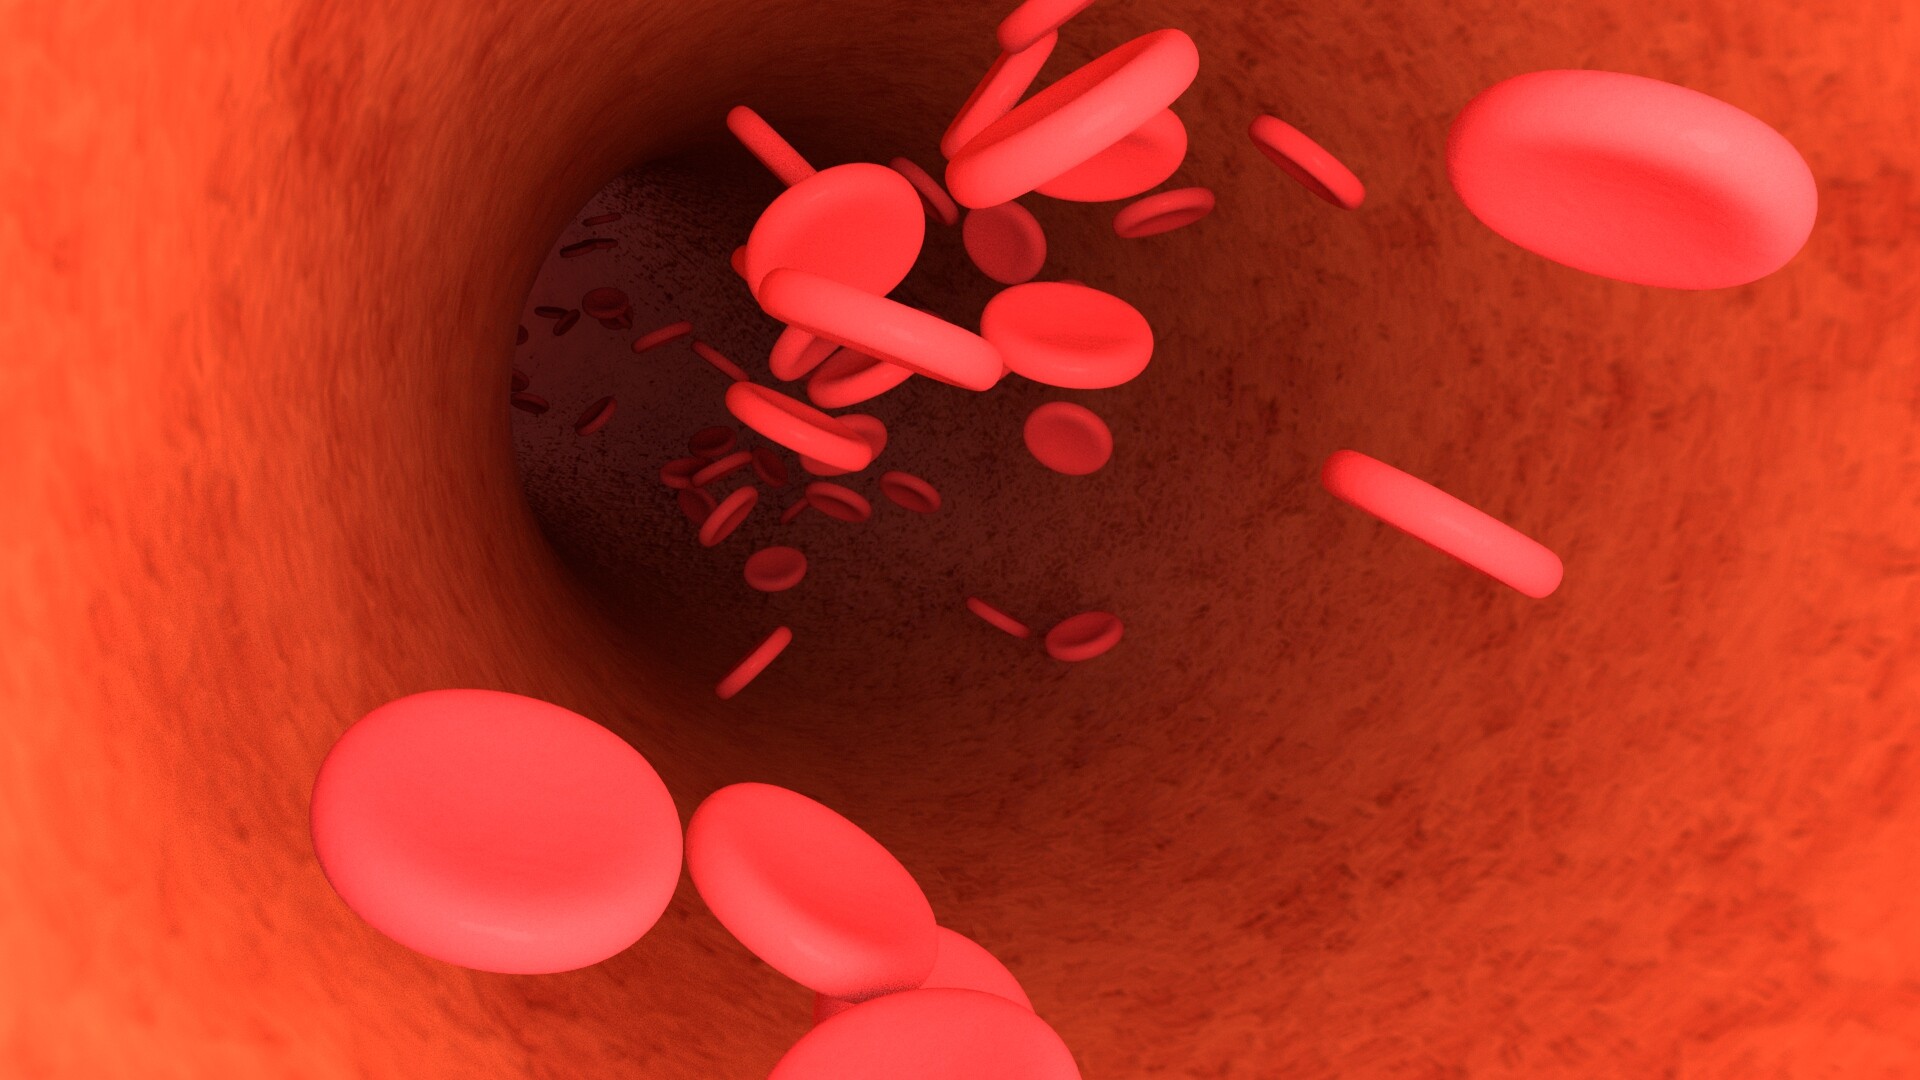 ArtStation - Medical Animation - Red Blood Cell Flow